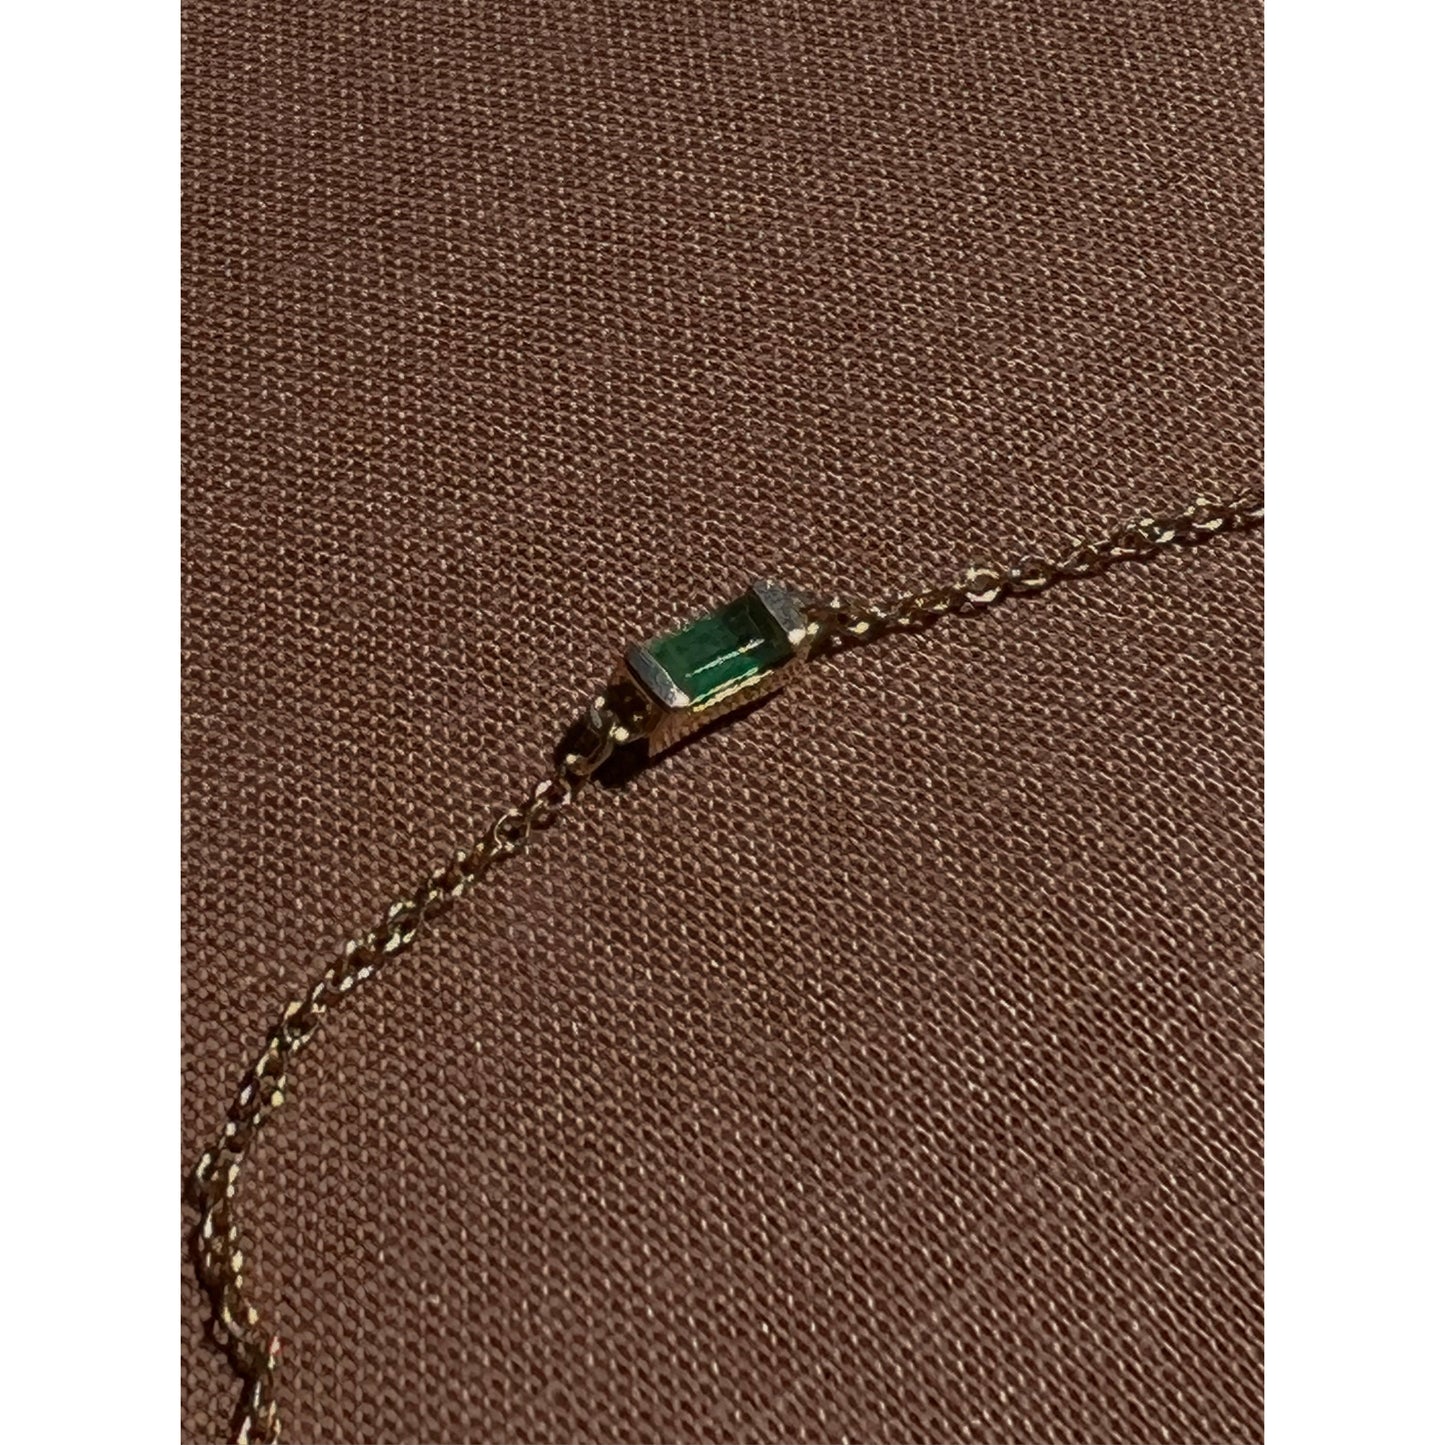 14k Yellow Gold Emerald Bracelet by Toasted Jewelry